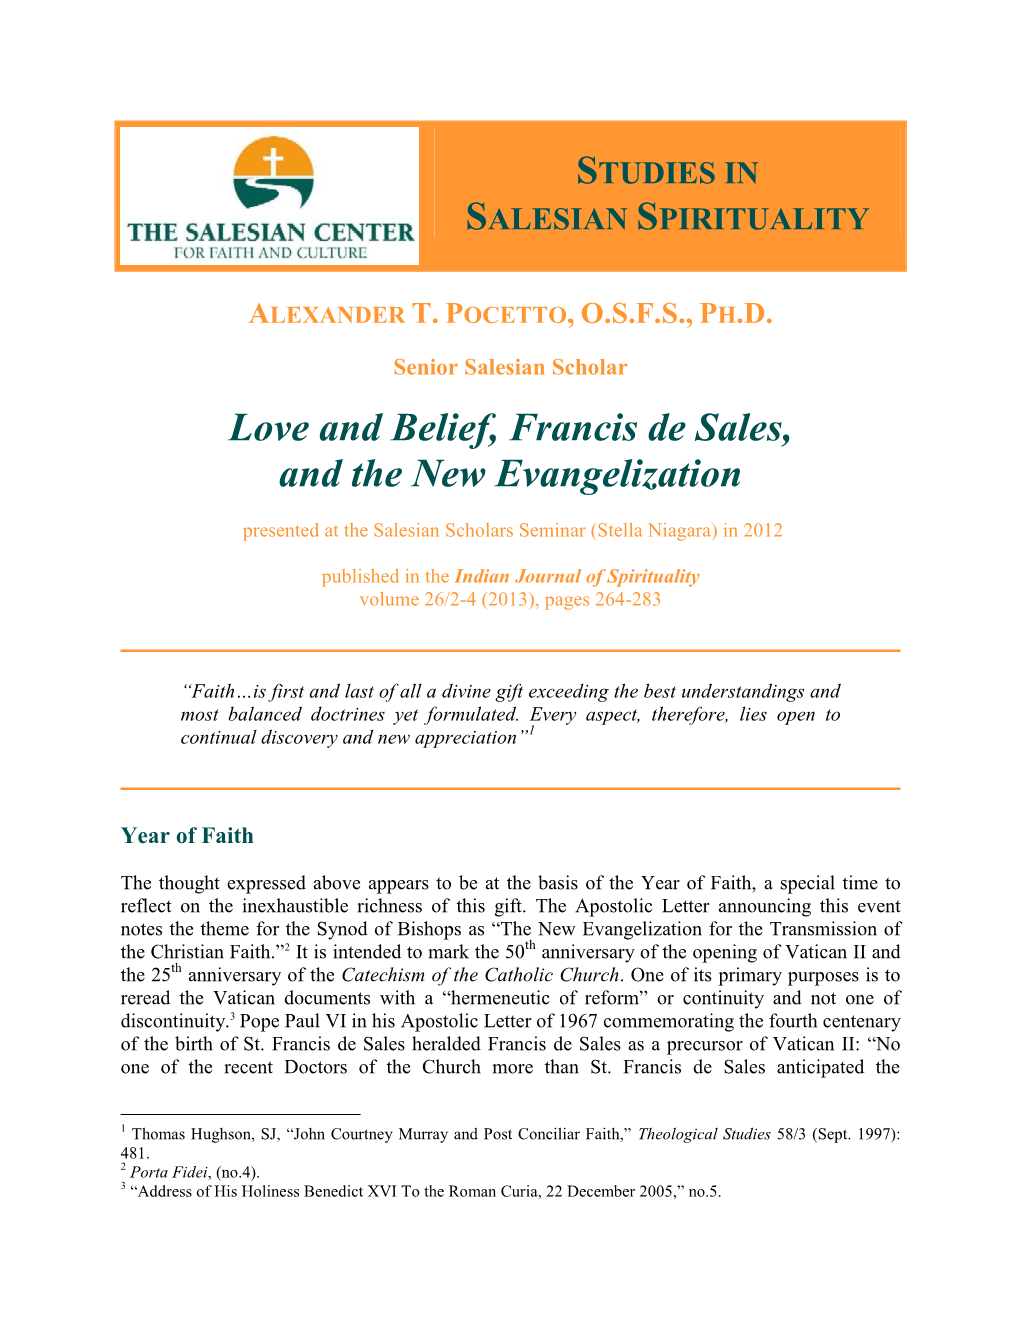 Love and Belief, Francis De Sales, and the New Evangelization